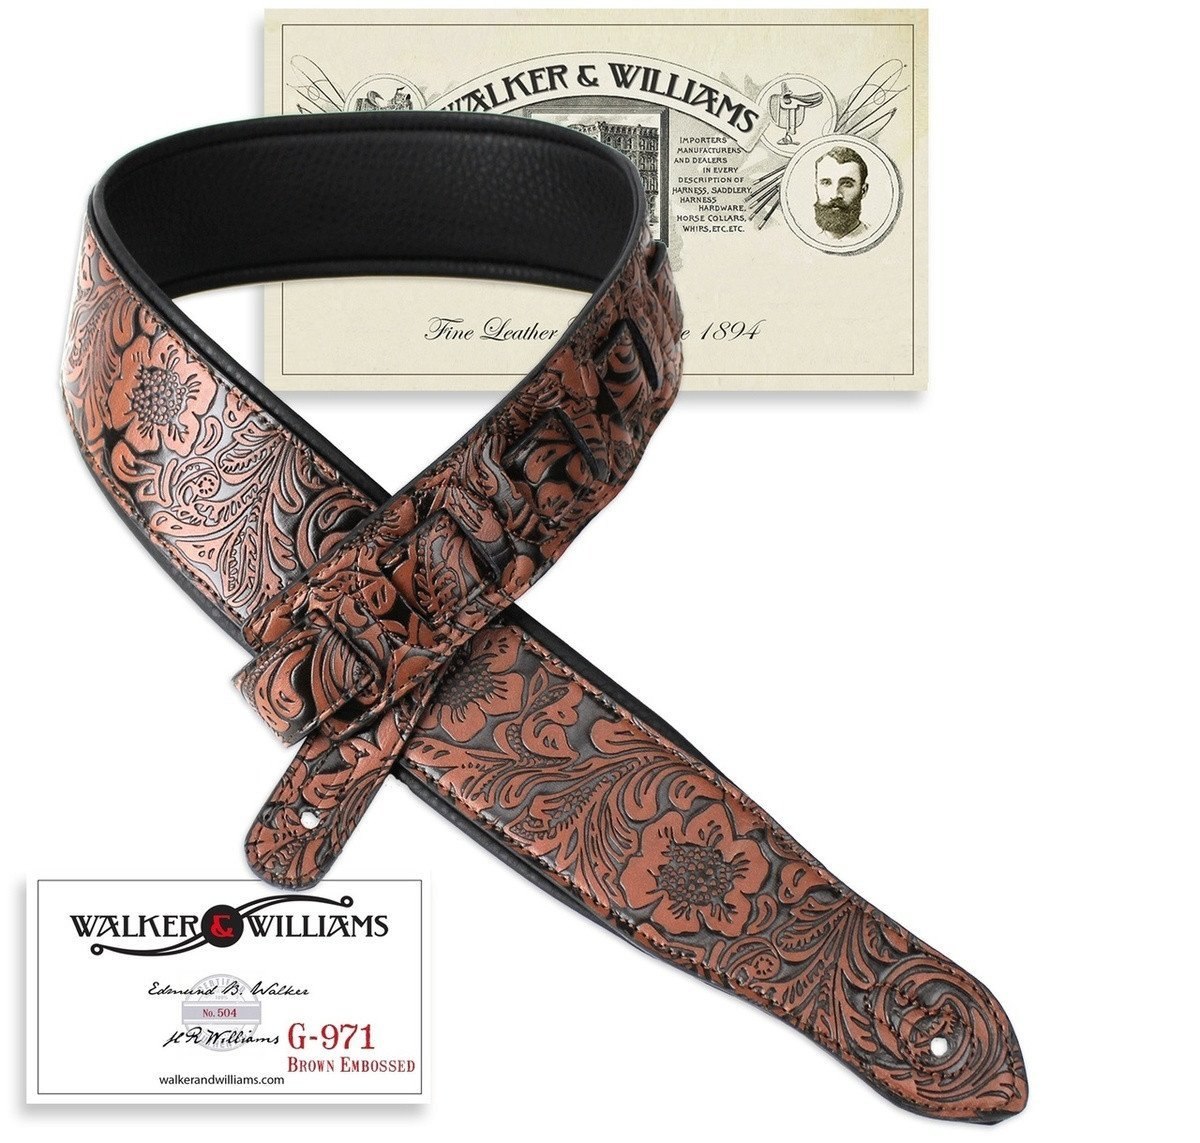 Walker & Williams Chestnut Brown Western Embossed Strap with Soft Padded Back